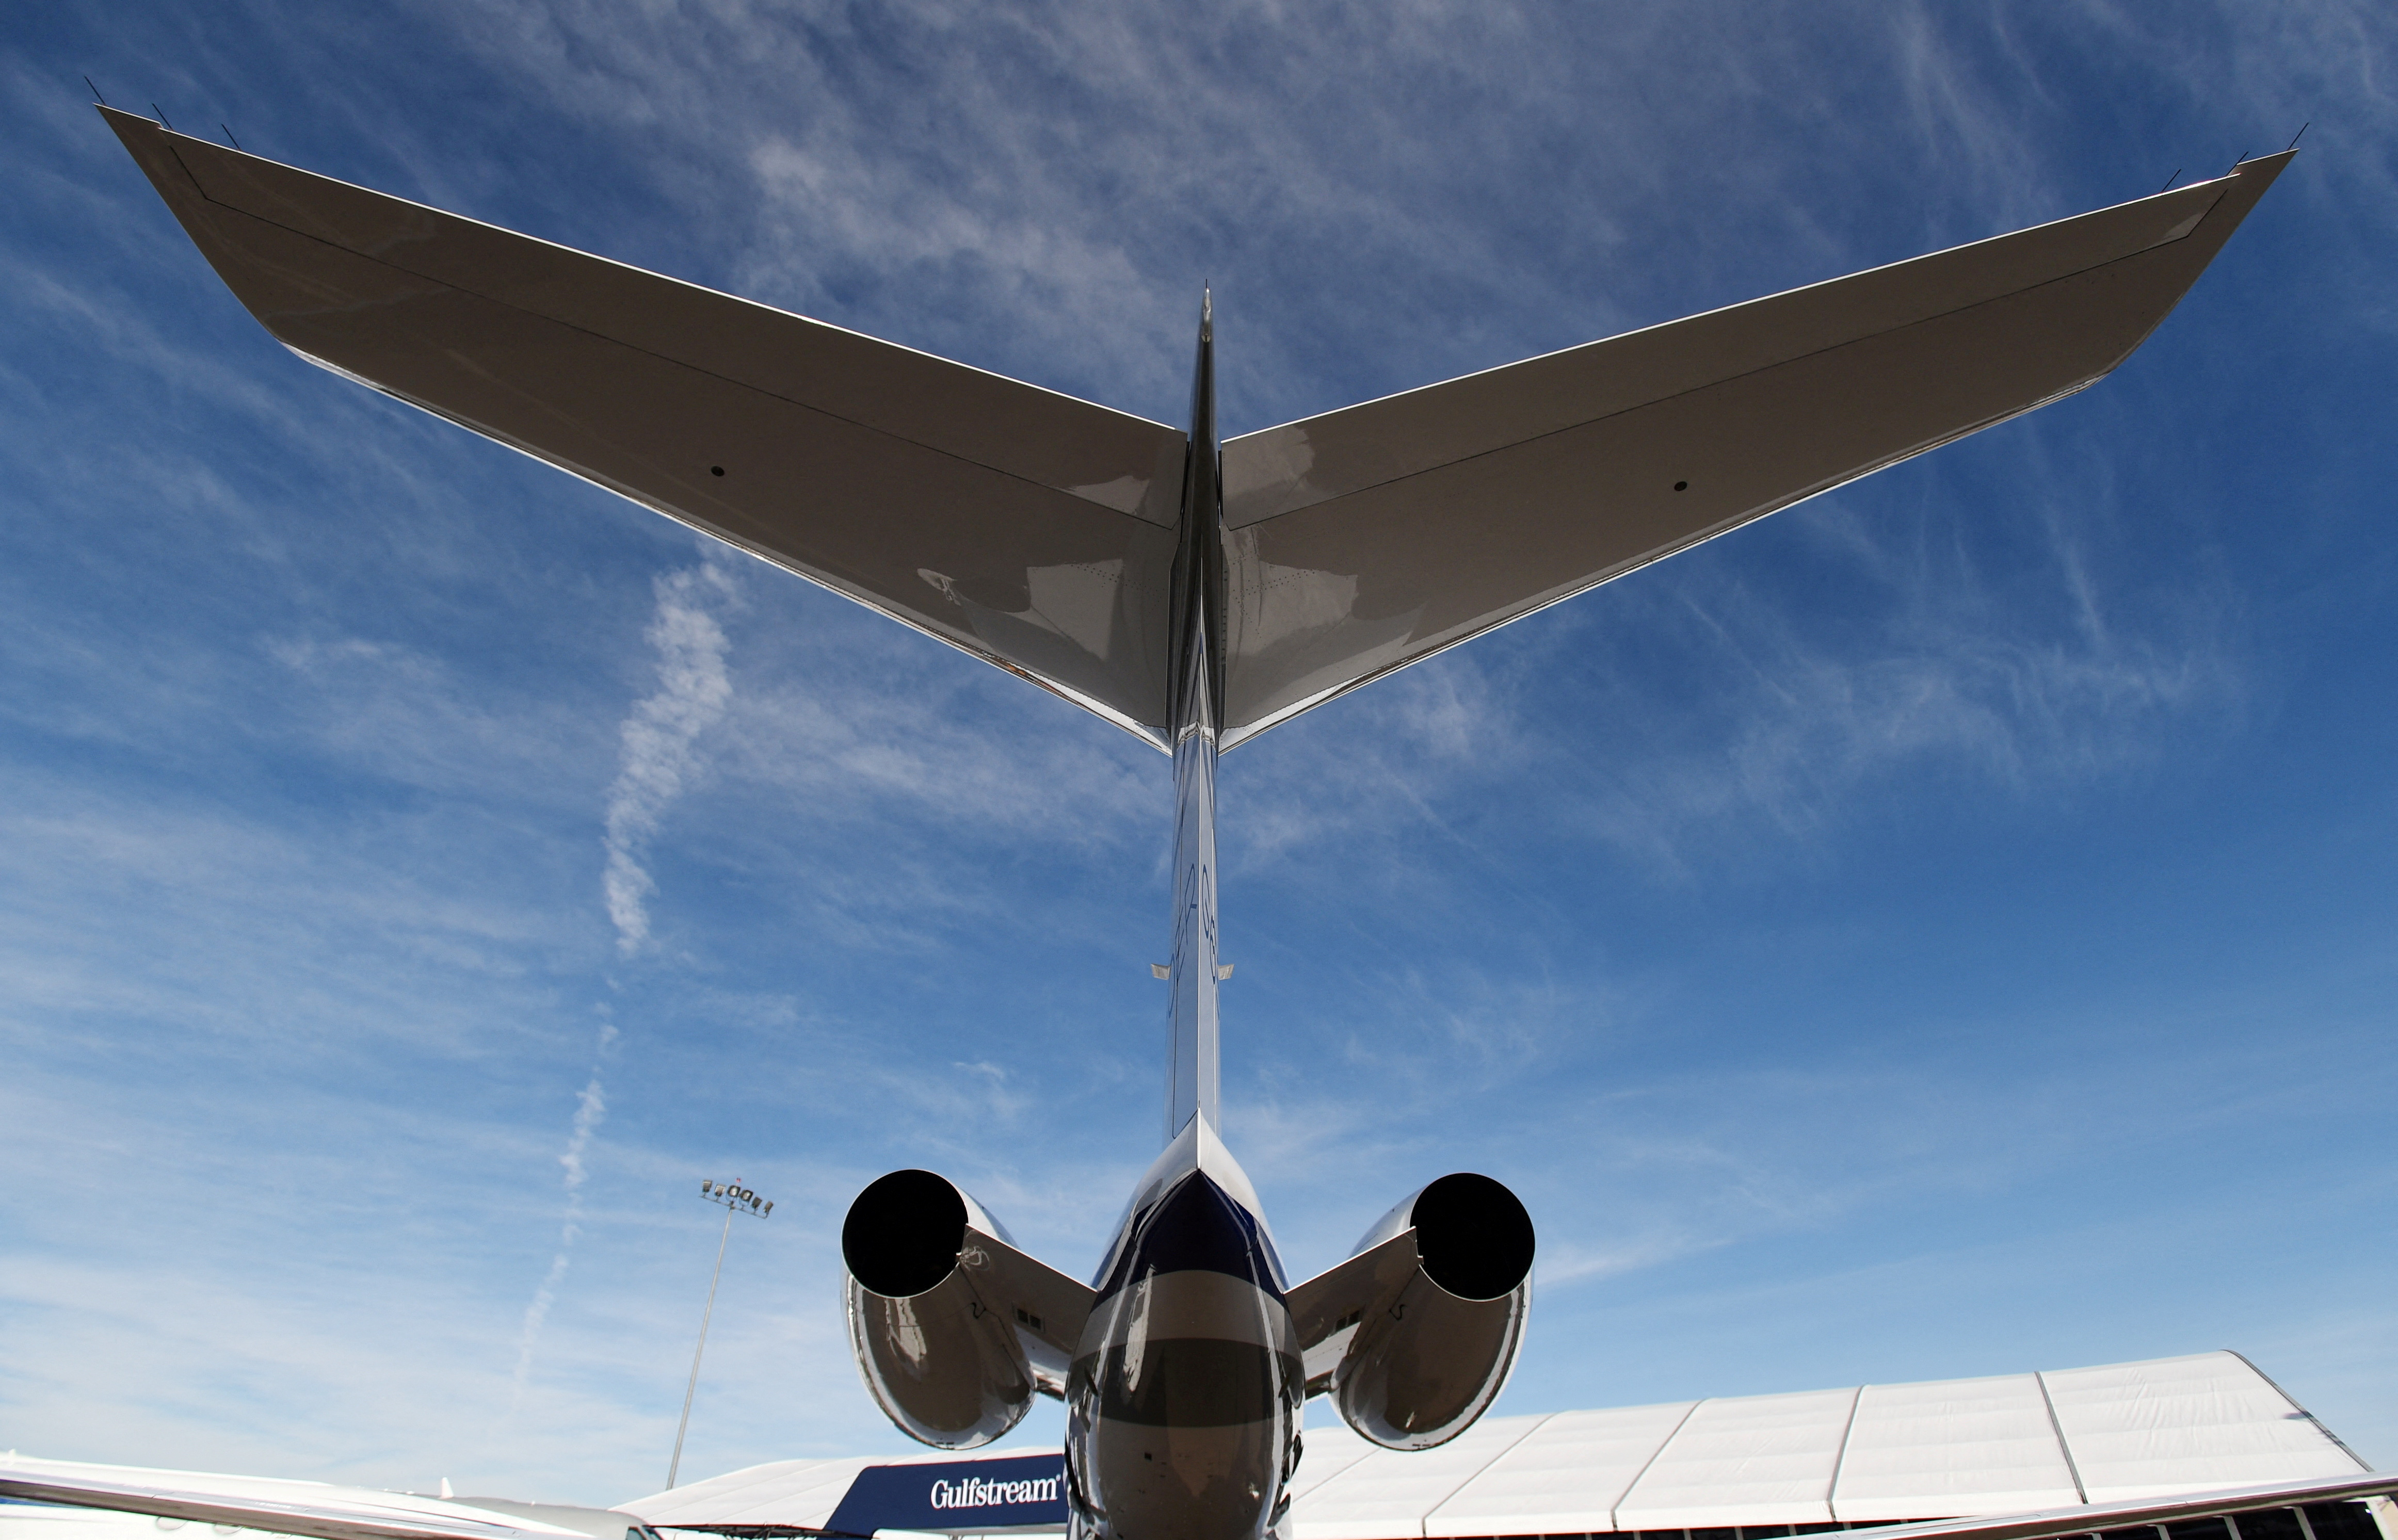 A Gulfstream 650ER business jet is displayed at the Gulfstream booth at the National Business Aviation Association (NBAA) exhibition in Las Vegas